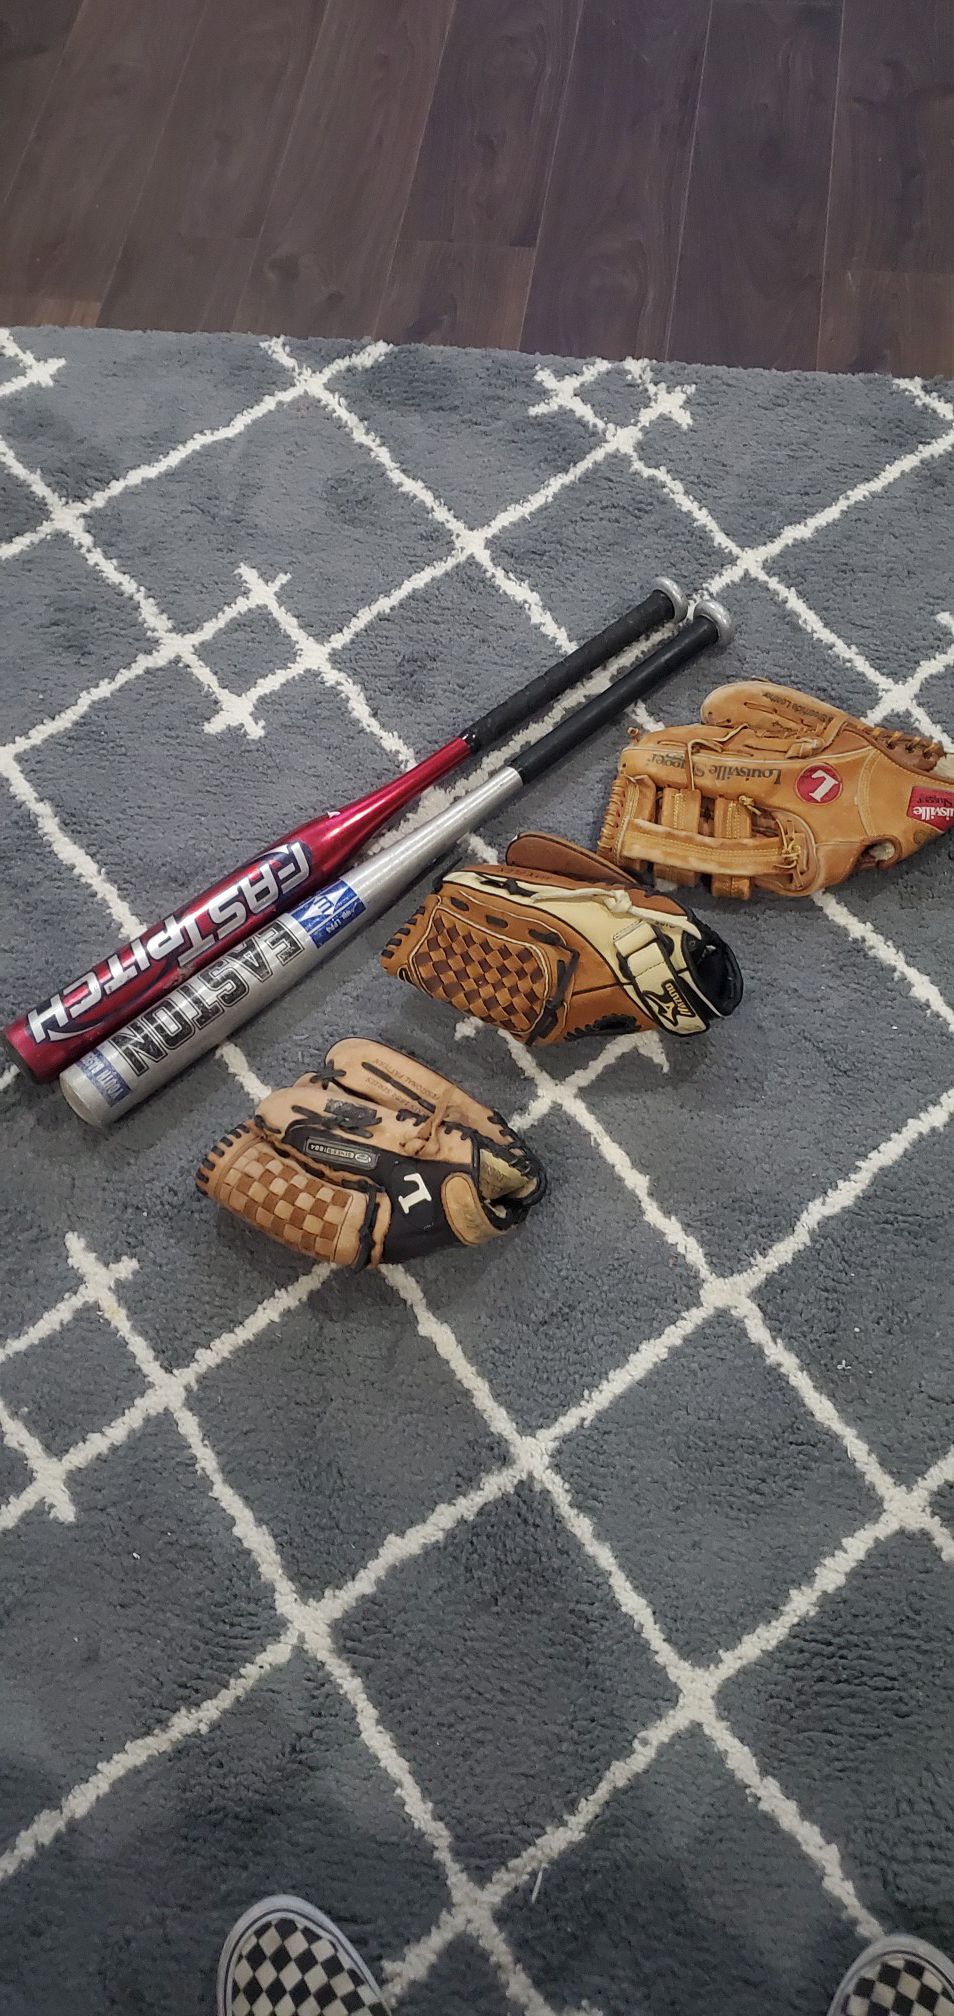 Youth Baseball items + 1 broken in adult glove